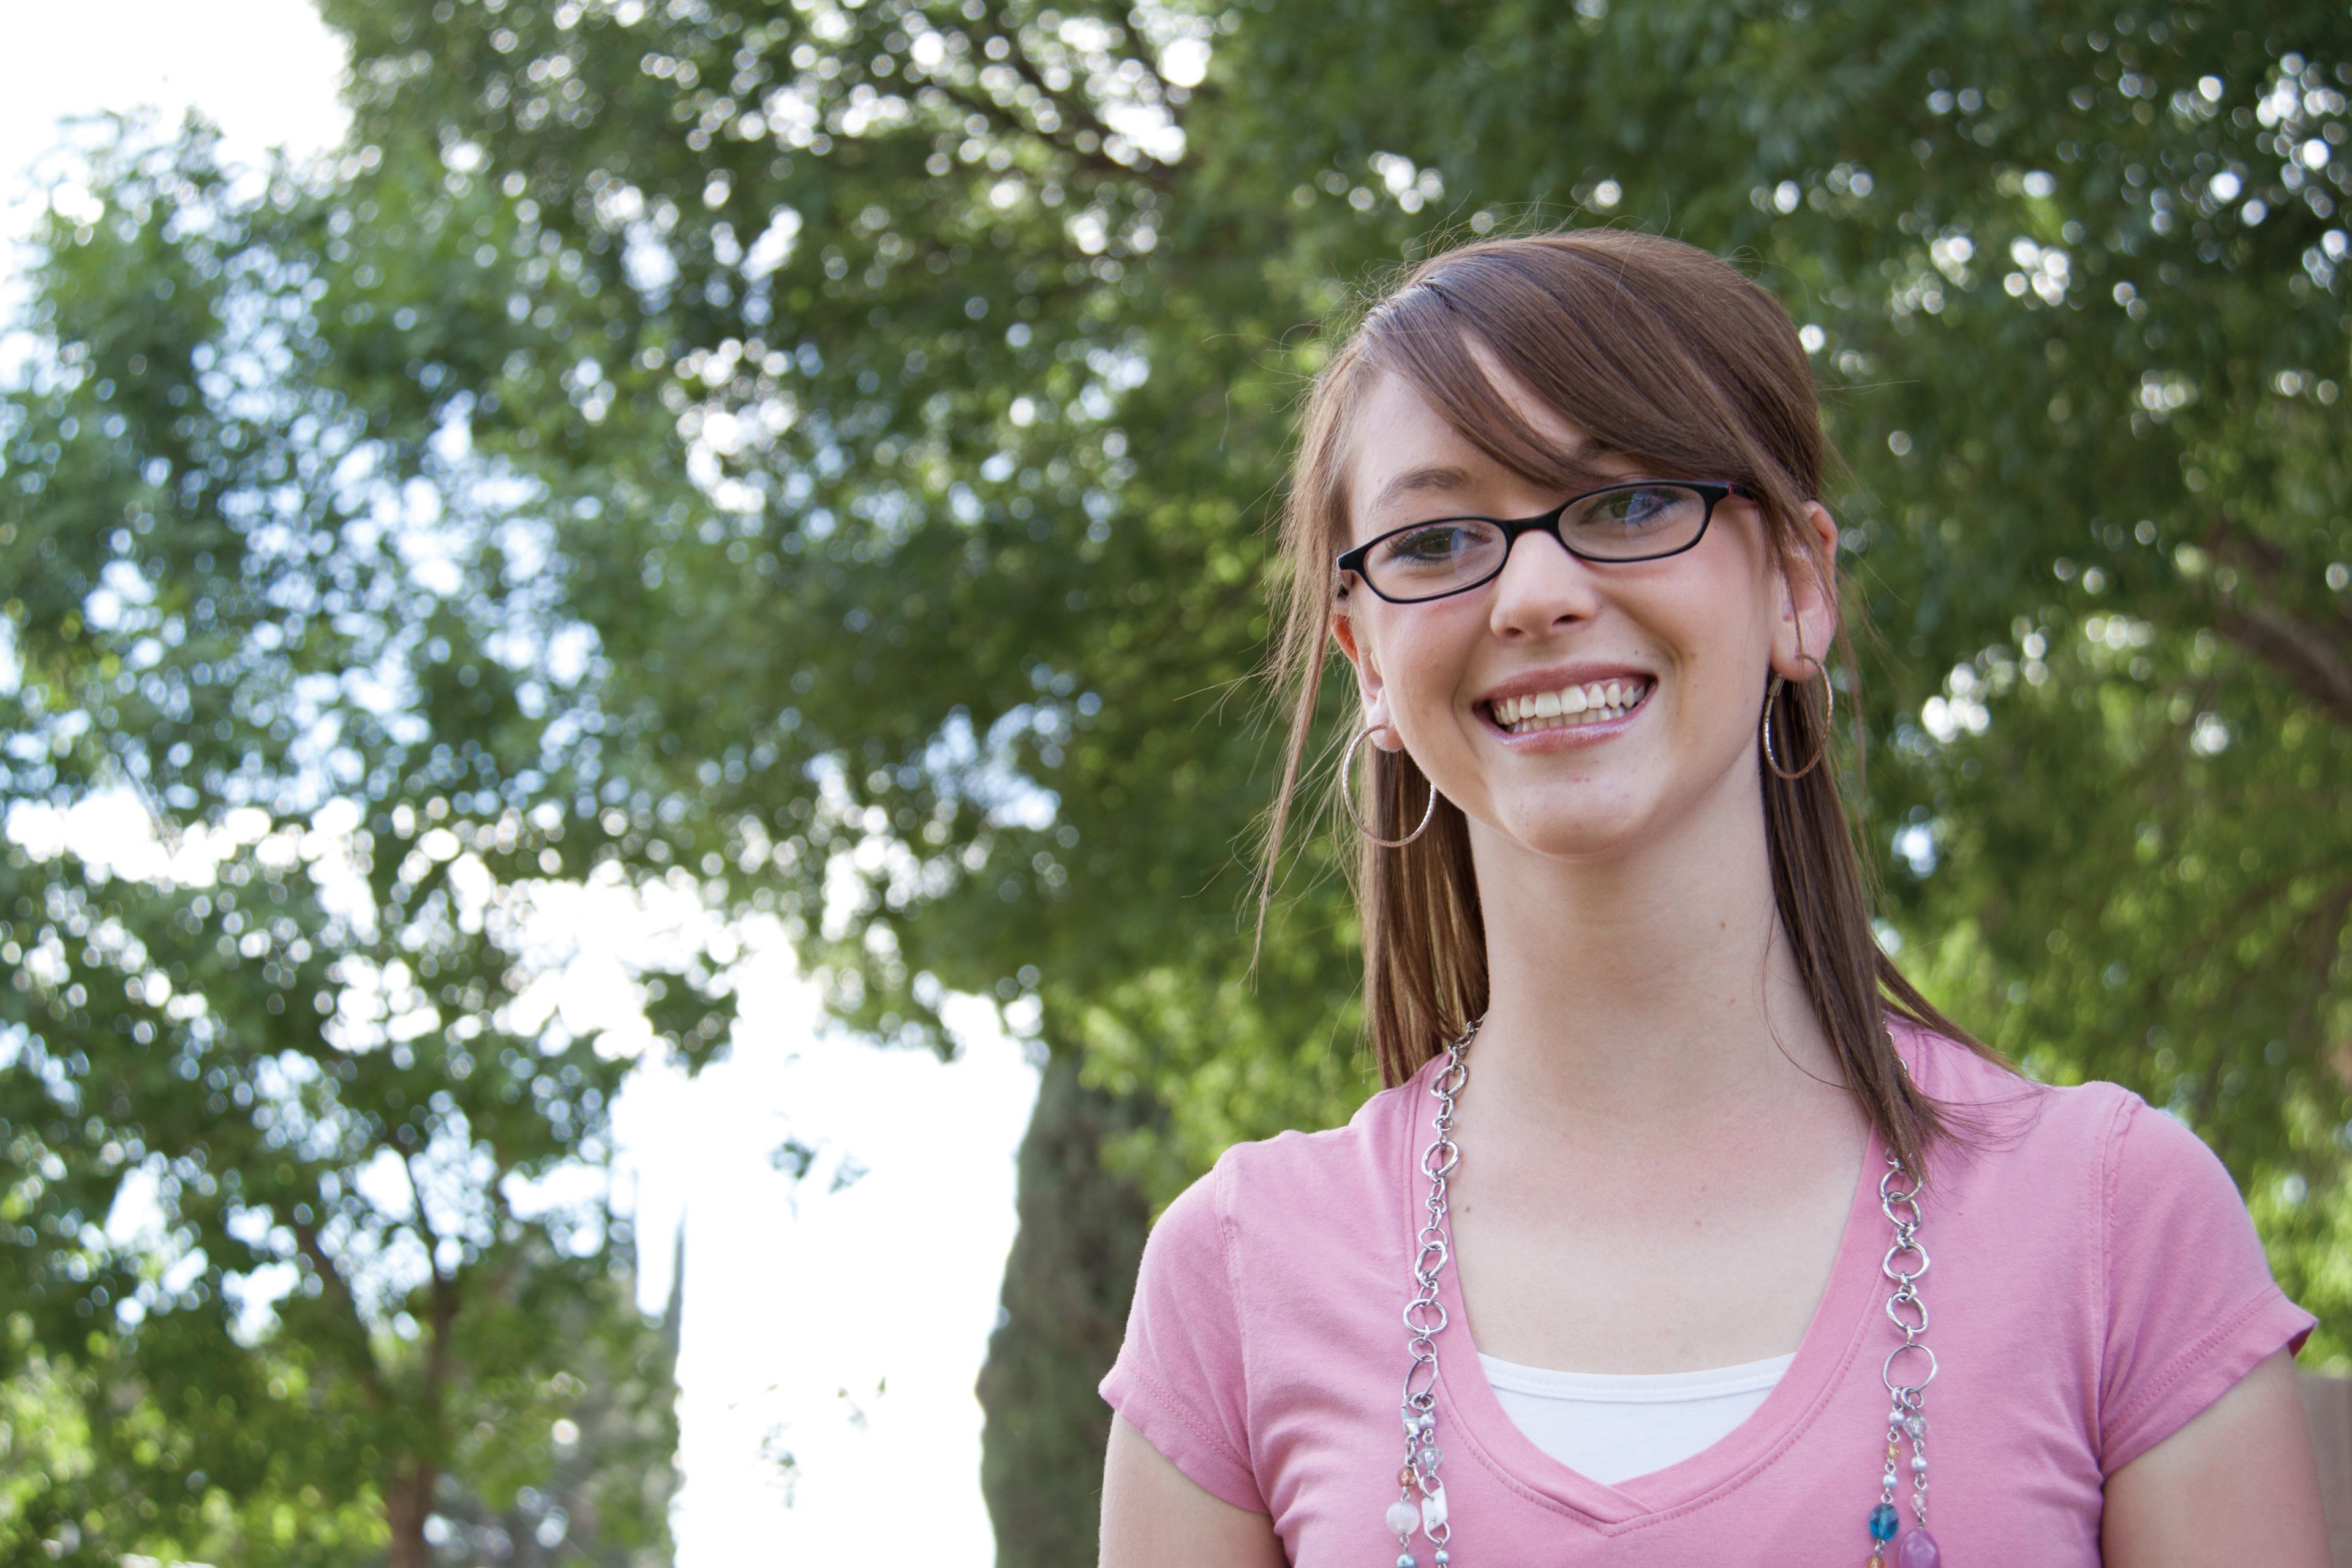 A portrait of a young woman with glasses, smiling.